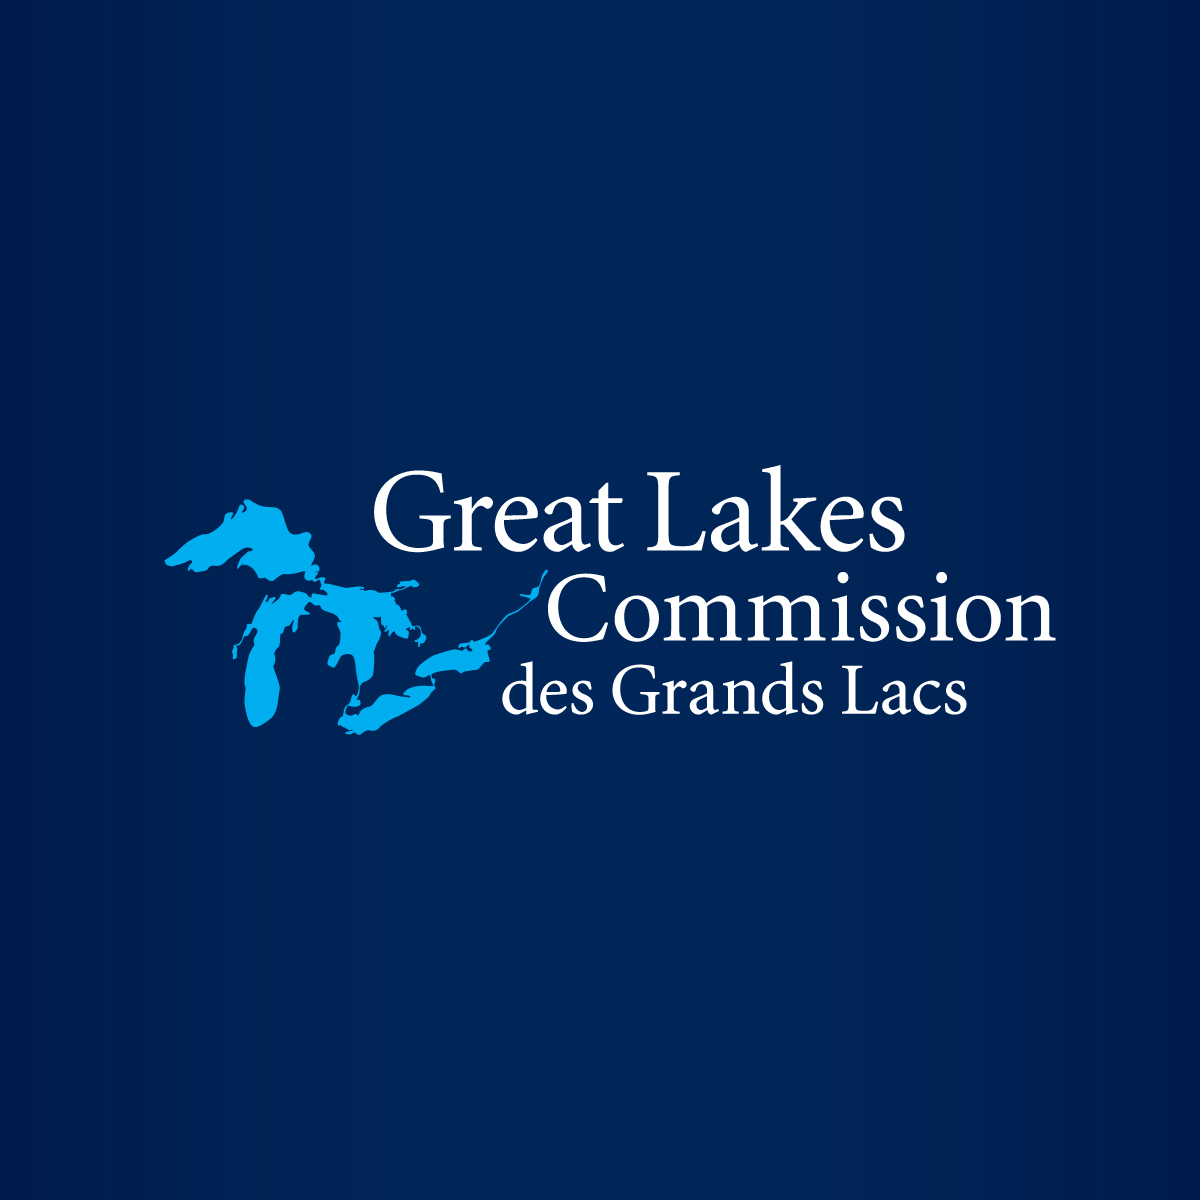 erdc researchers look for solutions to great lakes water quality issues